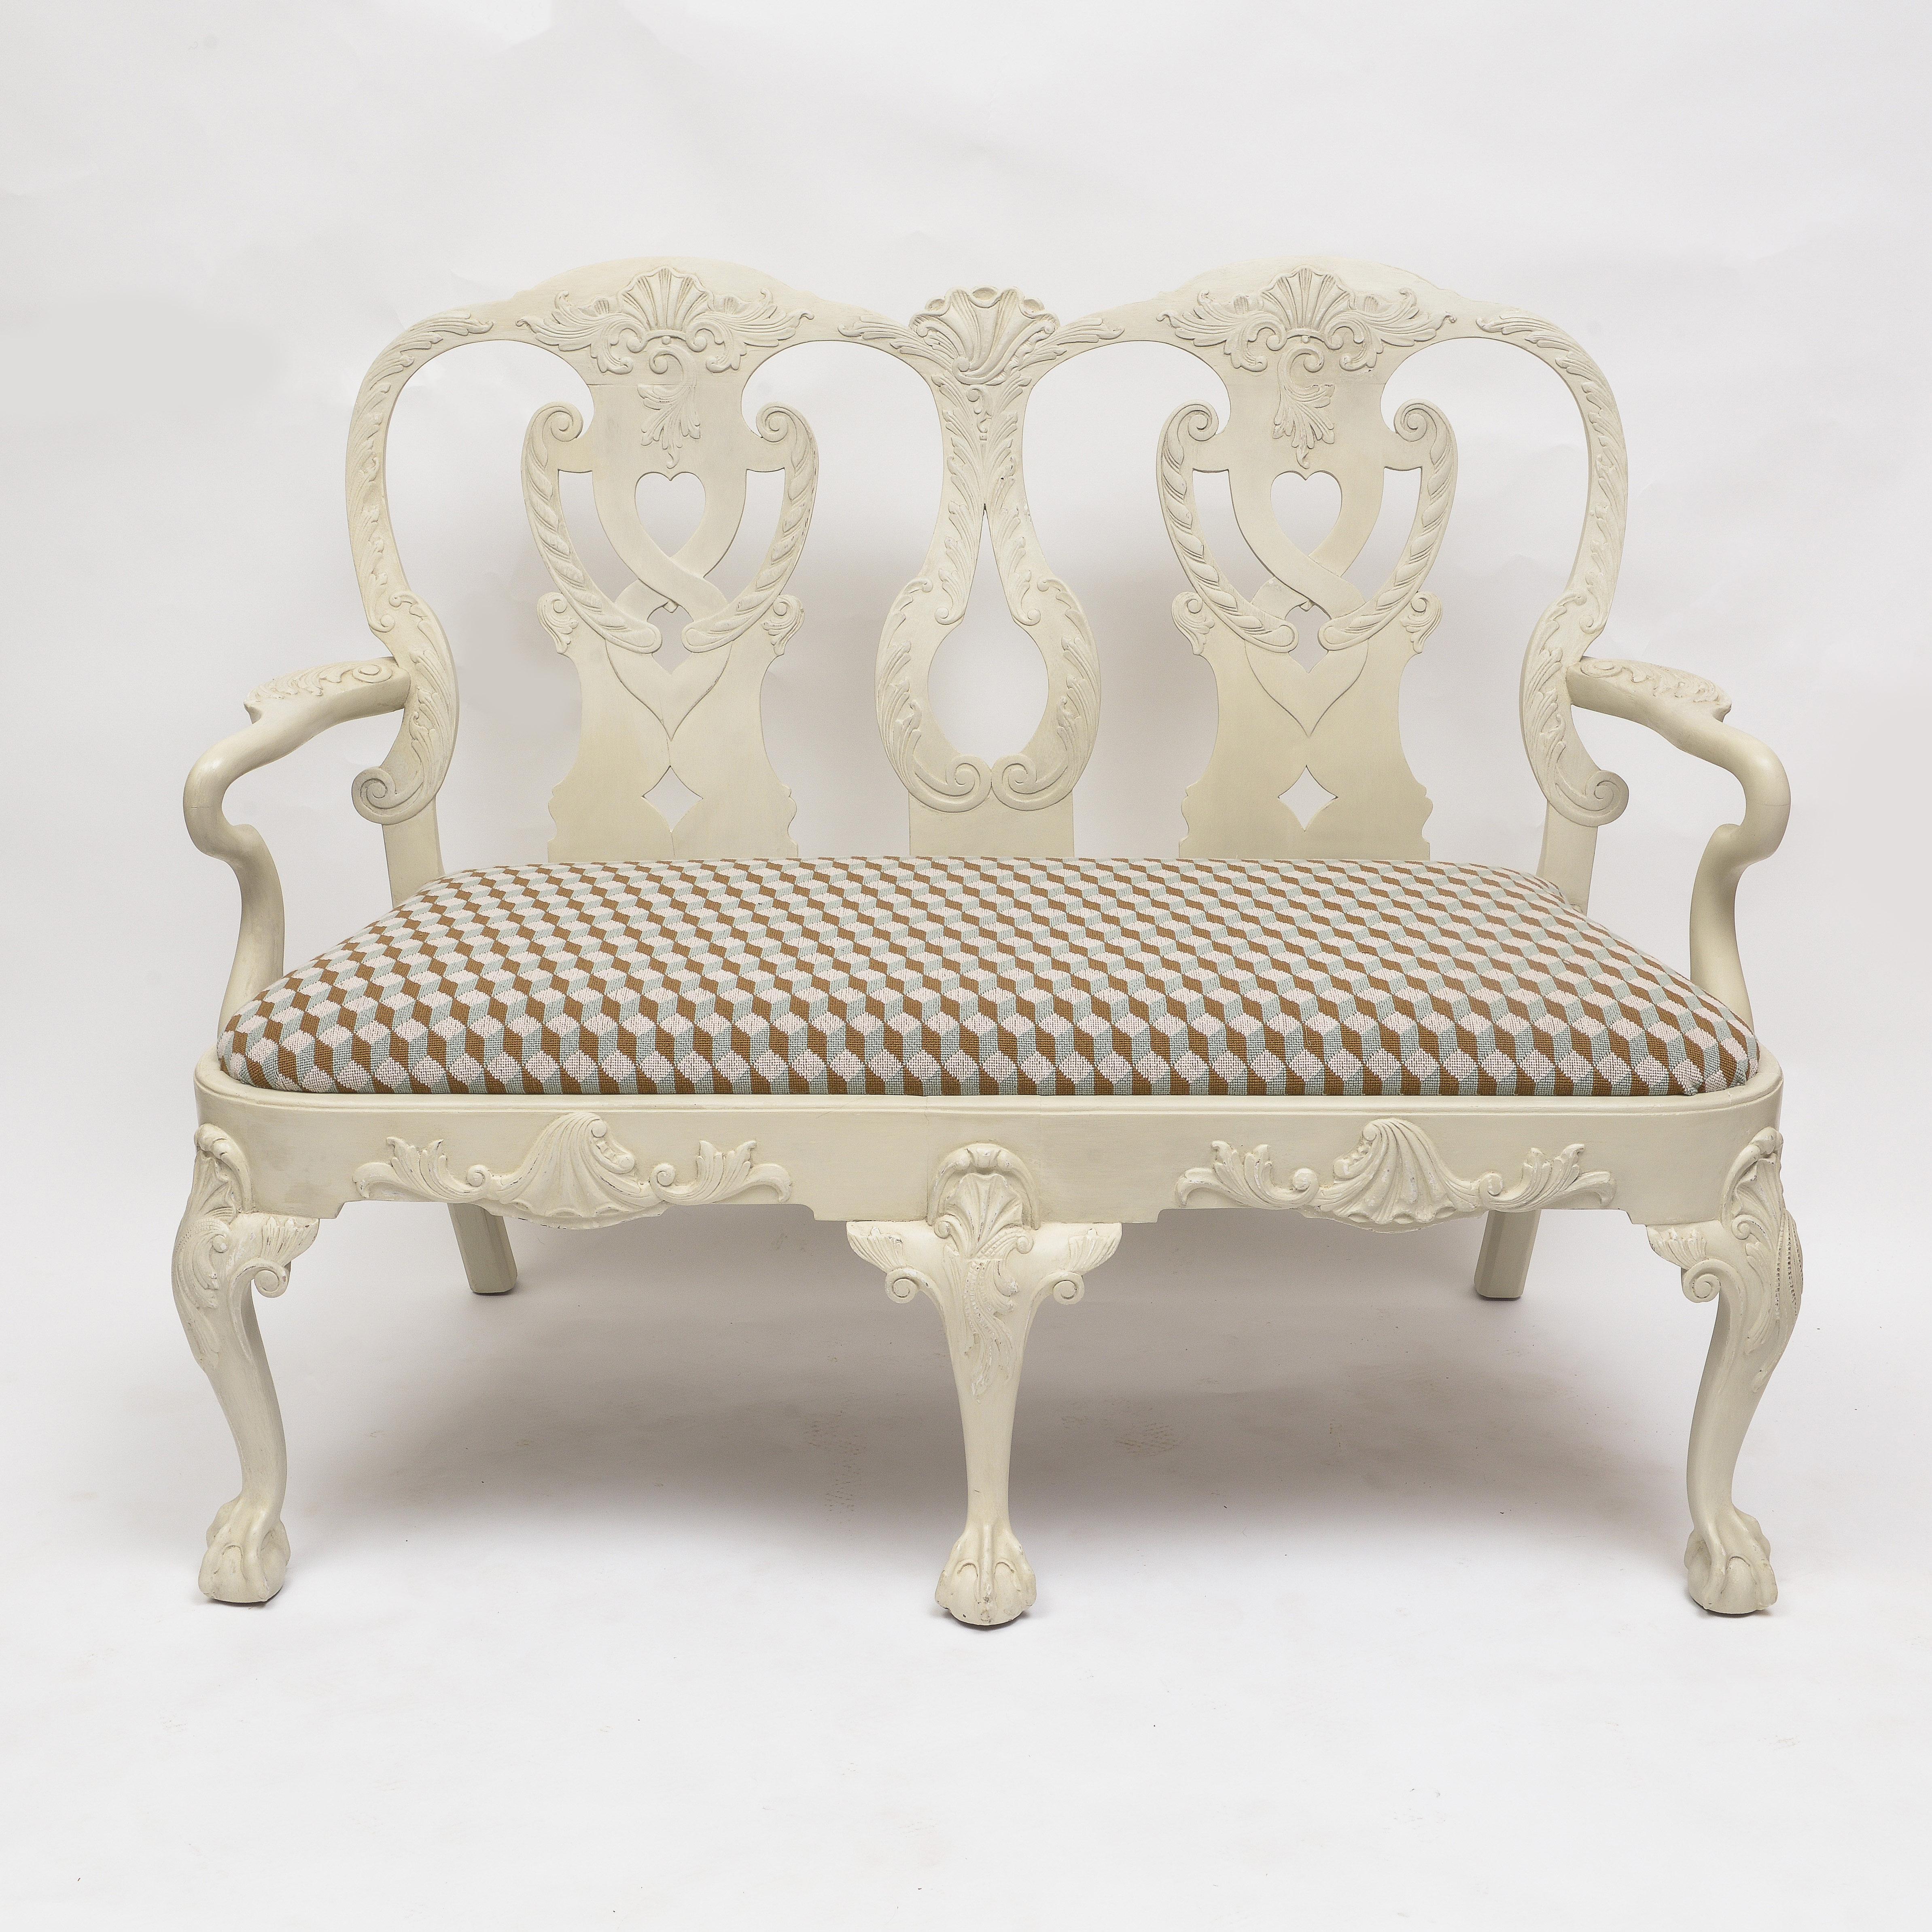 Soft Gray painted Georgian style Settee with great patina
Drop in seat covered in a geometric parquetry pattern
Sheppard crook arms
Supported by carved cabriolet legs and ball and claw feet